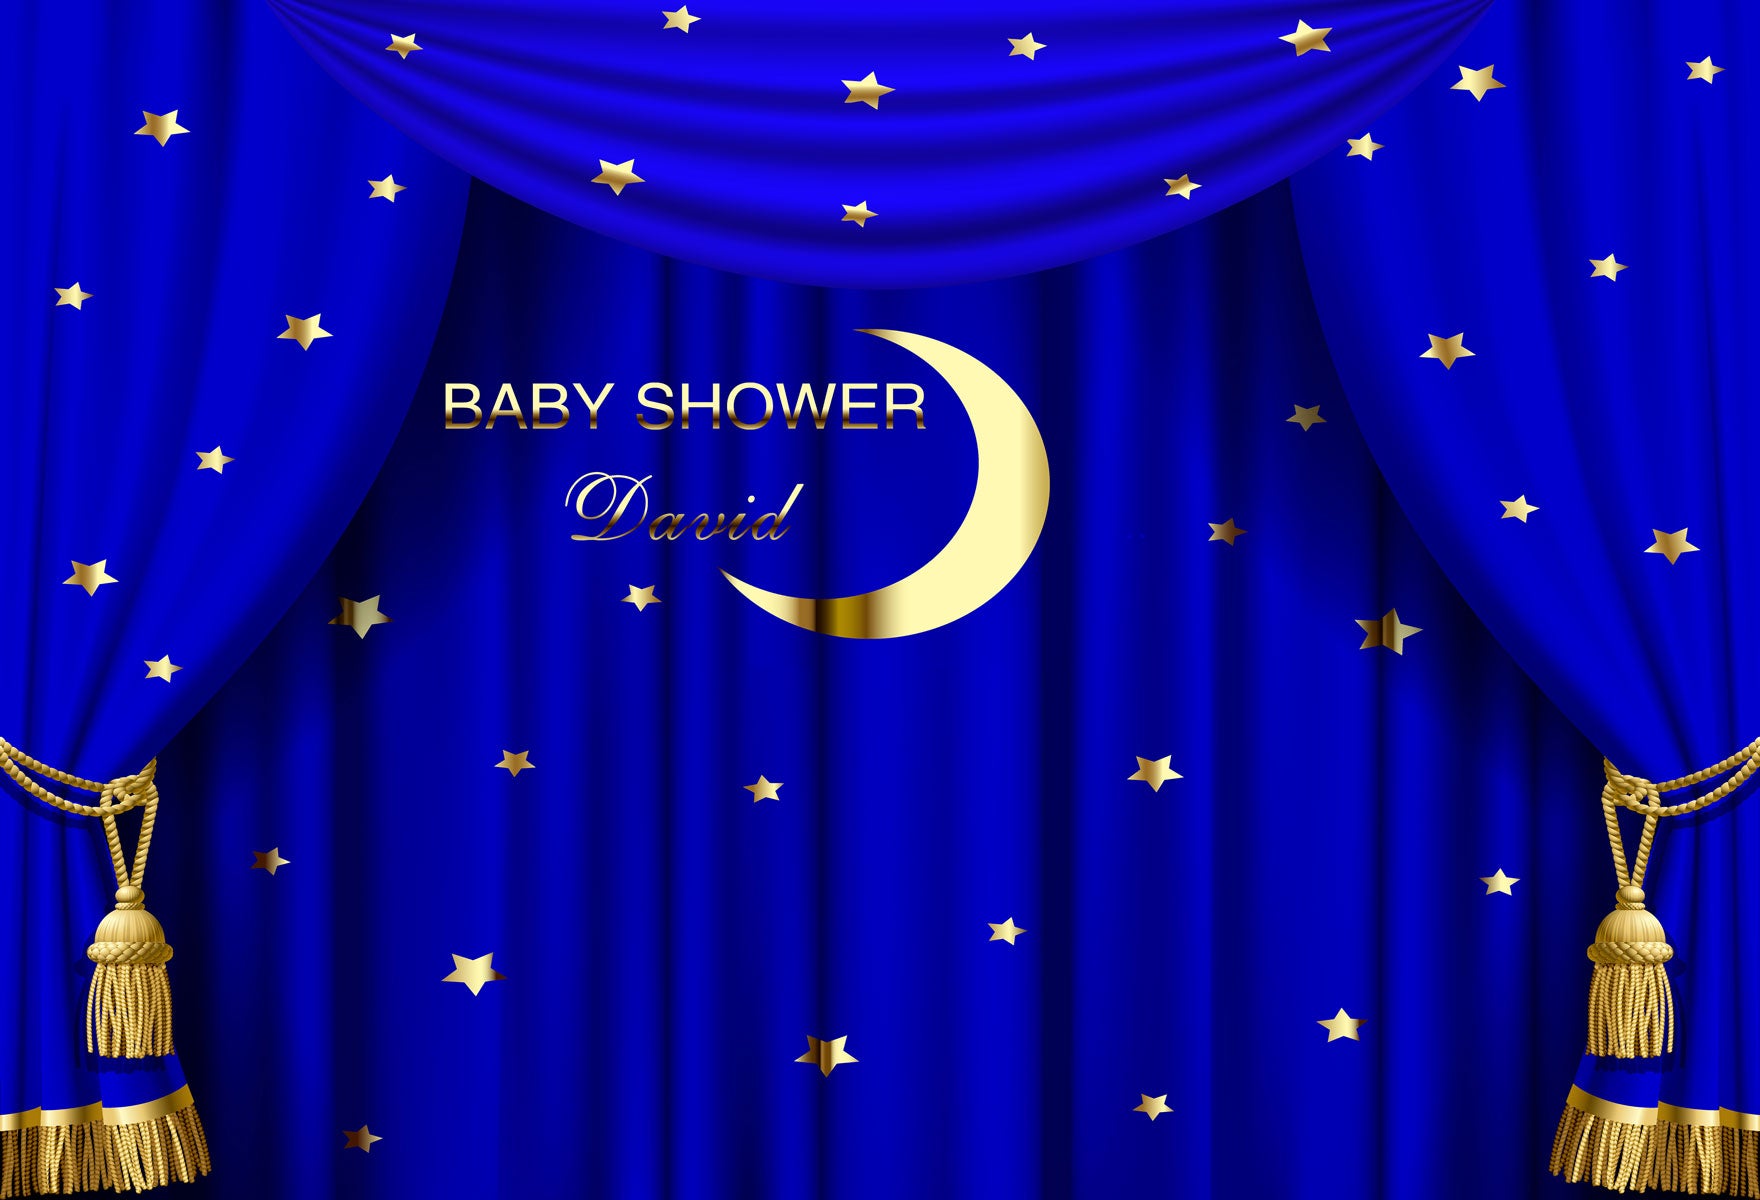 Kate Baby Shower Moon Blue Curtain Backdrop Custom for Photography - Kate backdrops UK